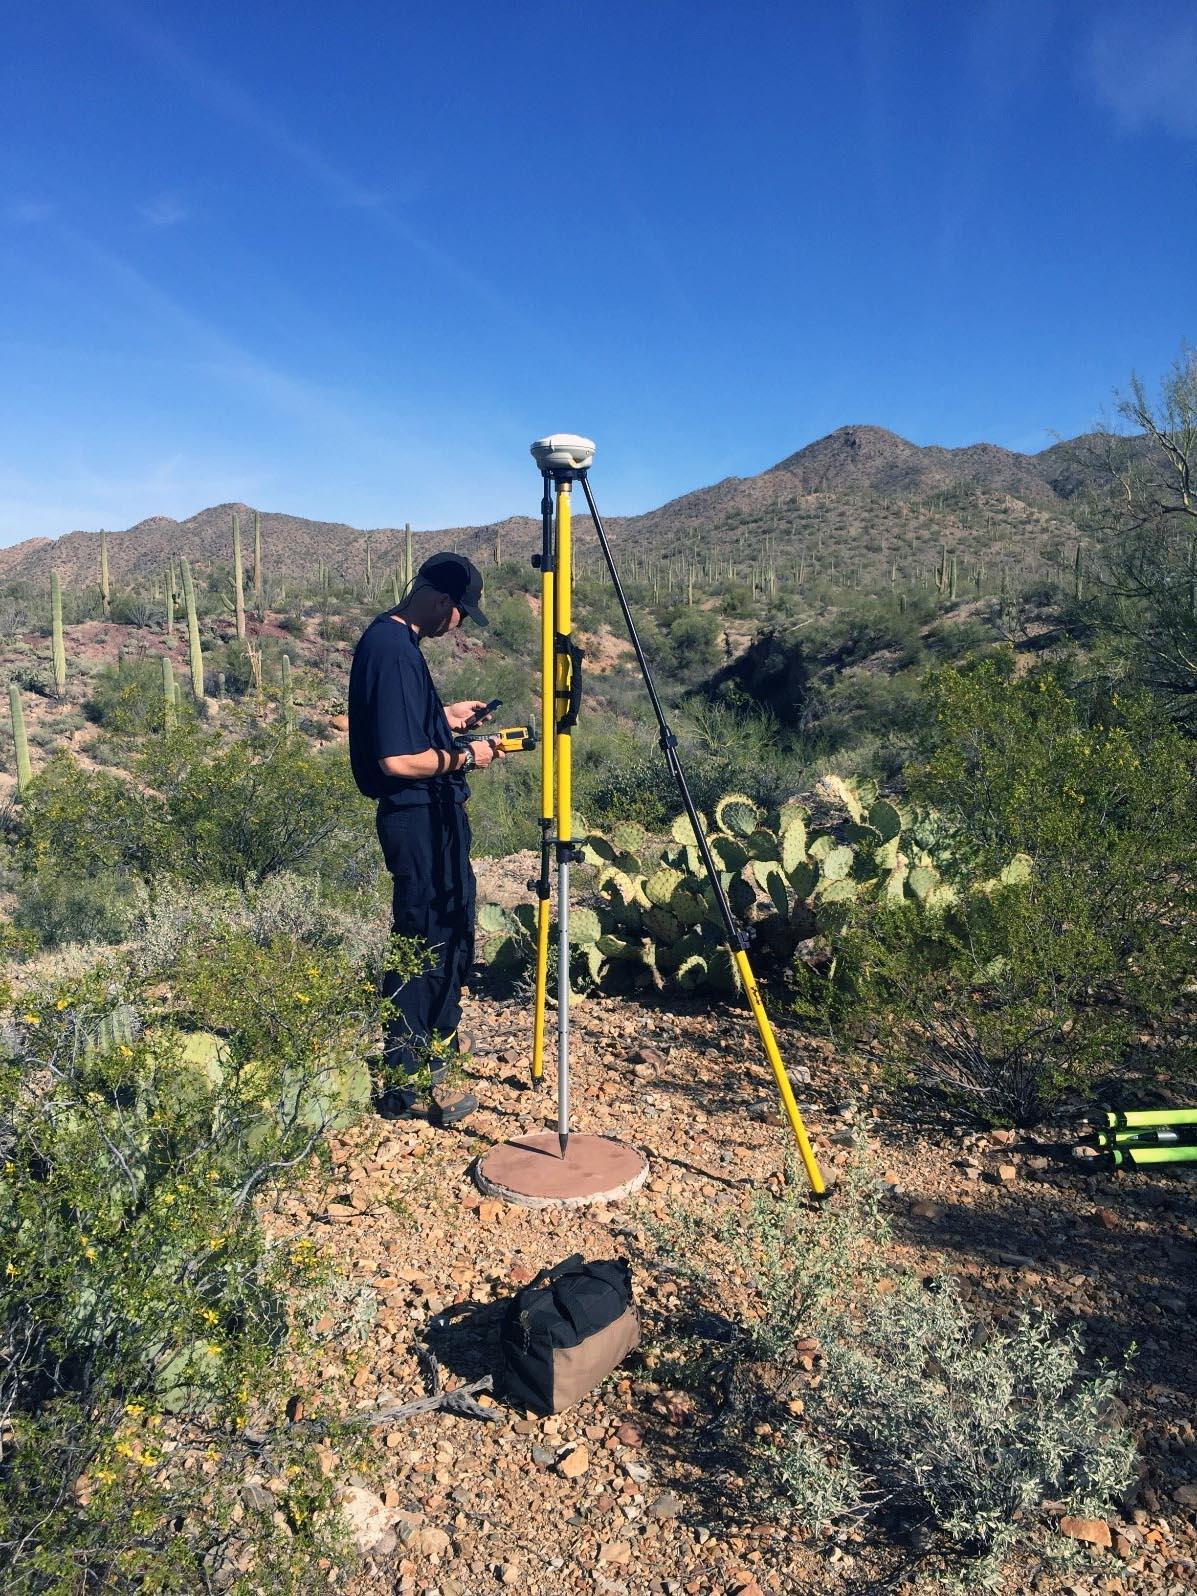 Person using equipment to collect Global Navigation Satellite System (GNSS) data.